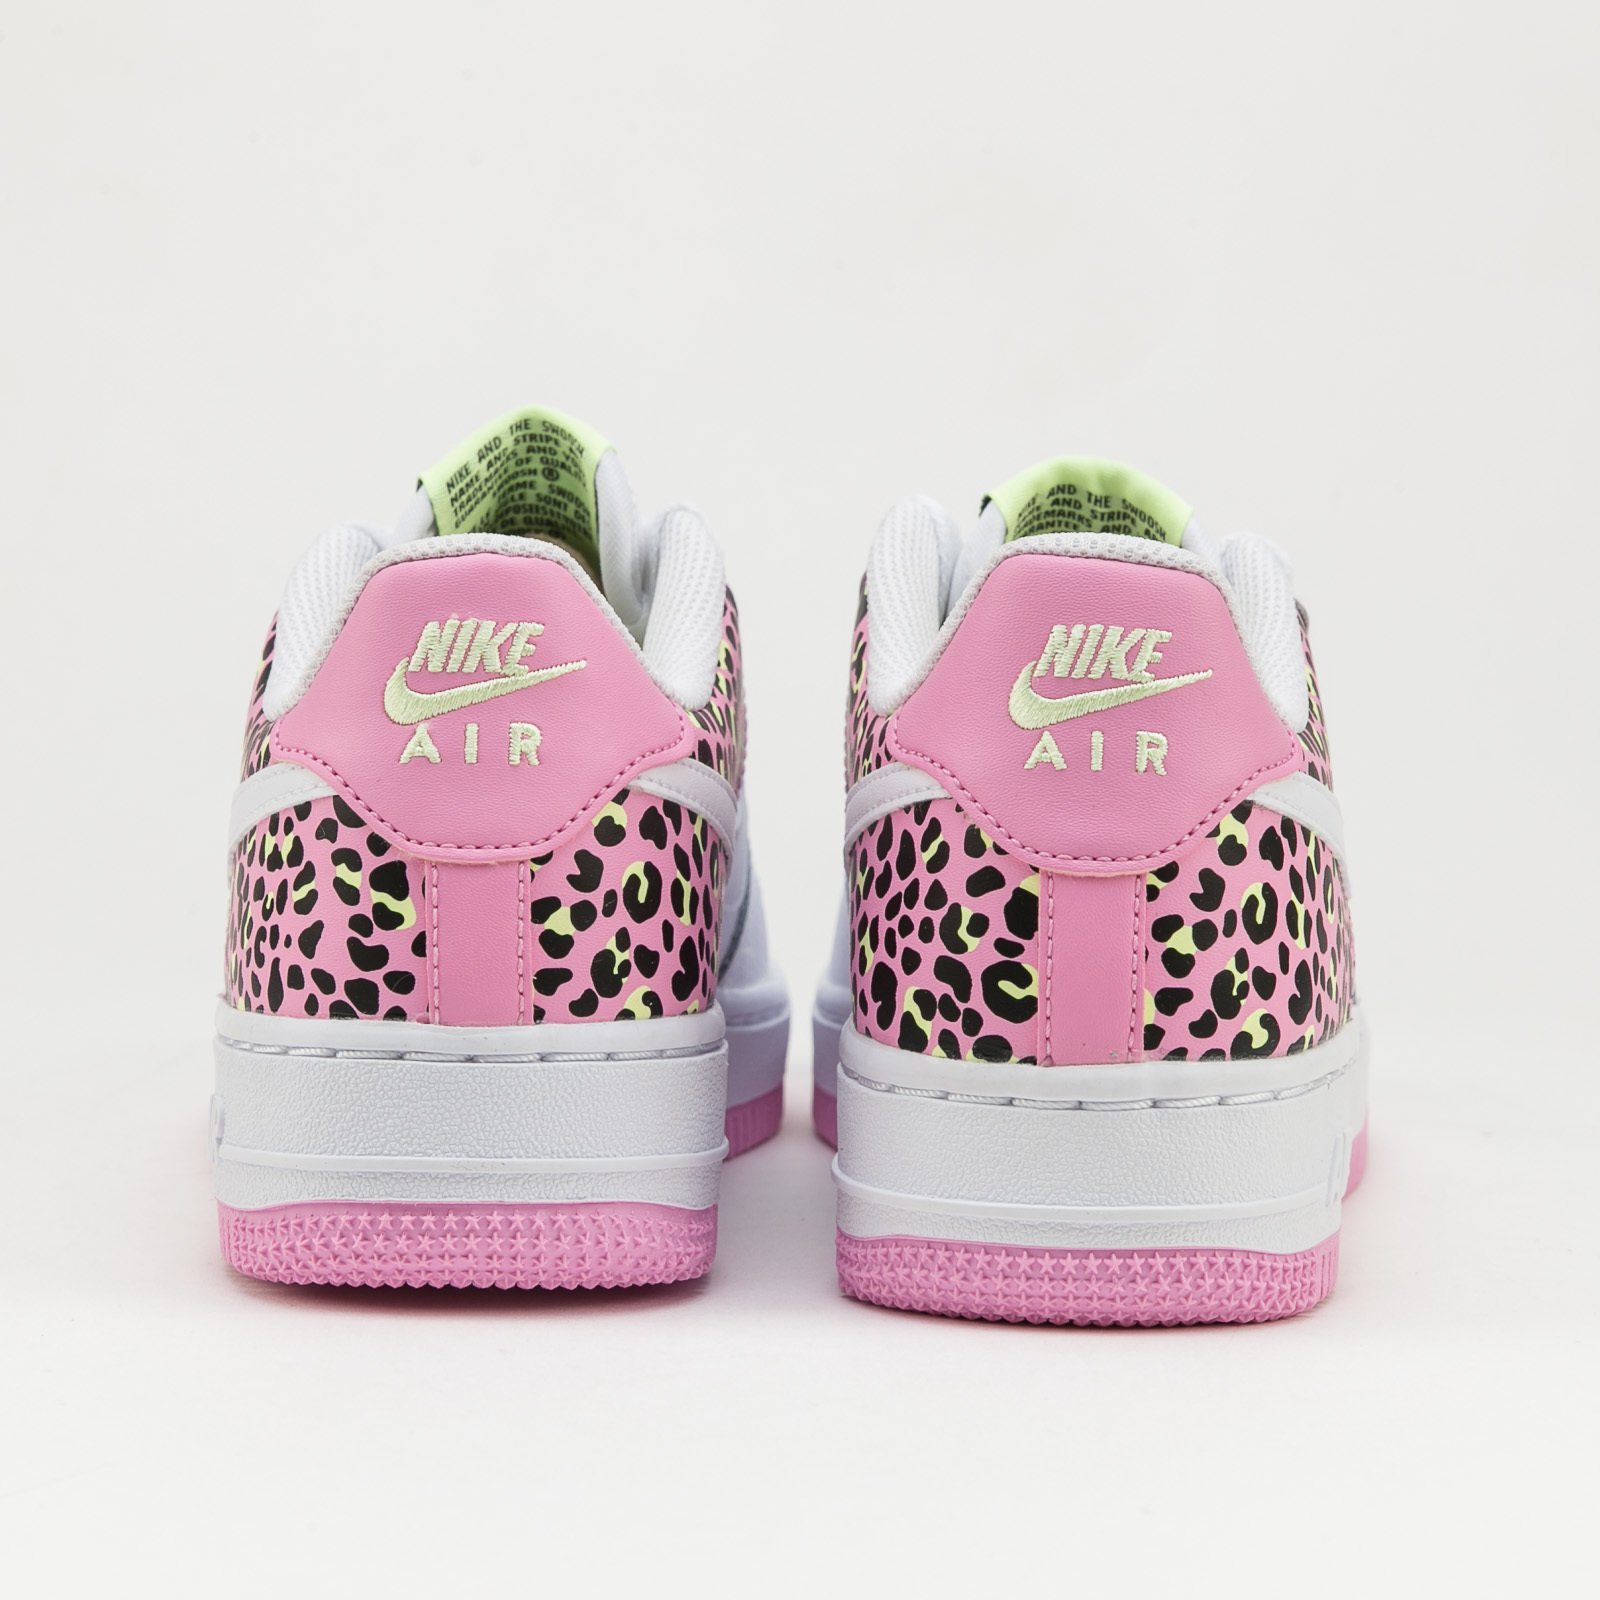 Air Force 1 '07 "Pink Leopard" GS